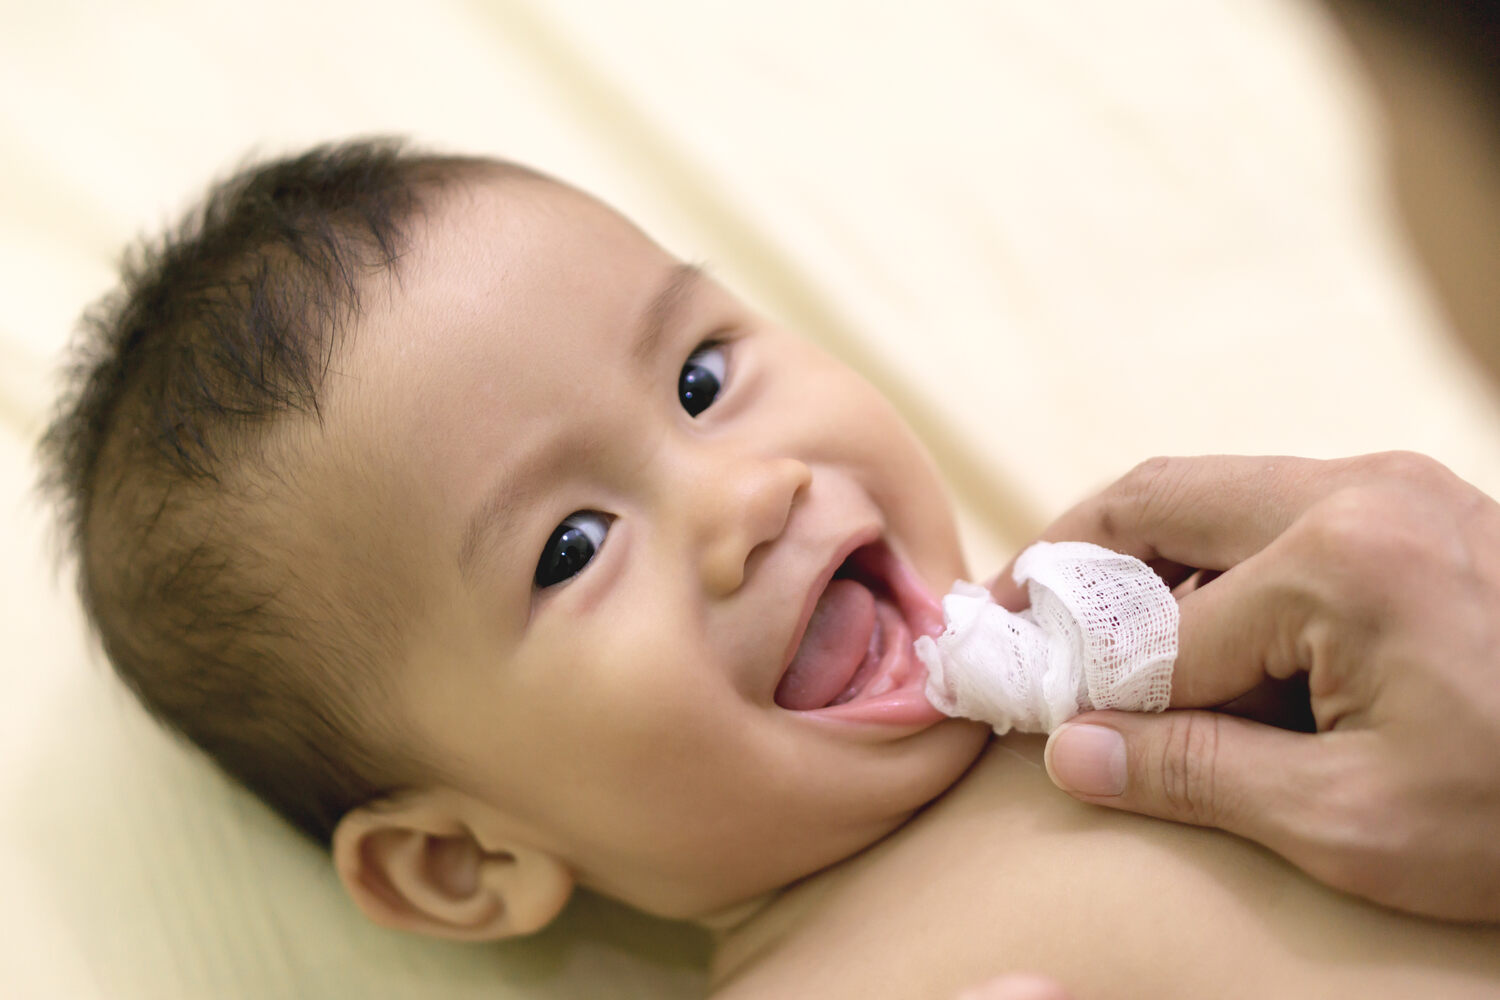 How to Clean Your Baby’s Mouth – When to Start And Precautions